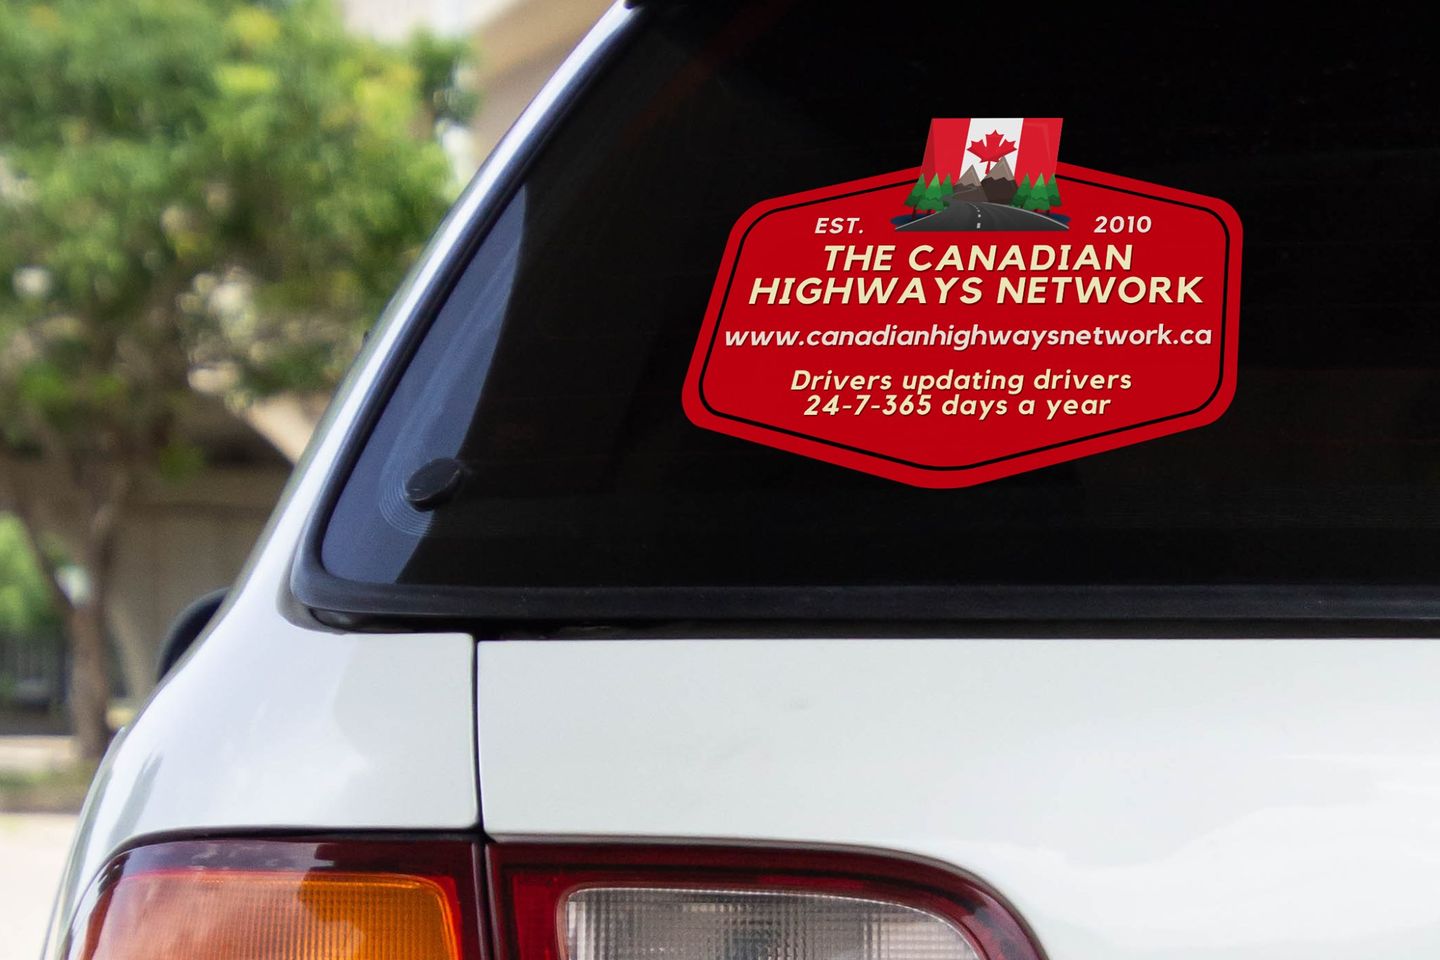 The Canadian Highways Network